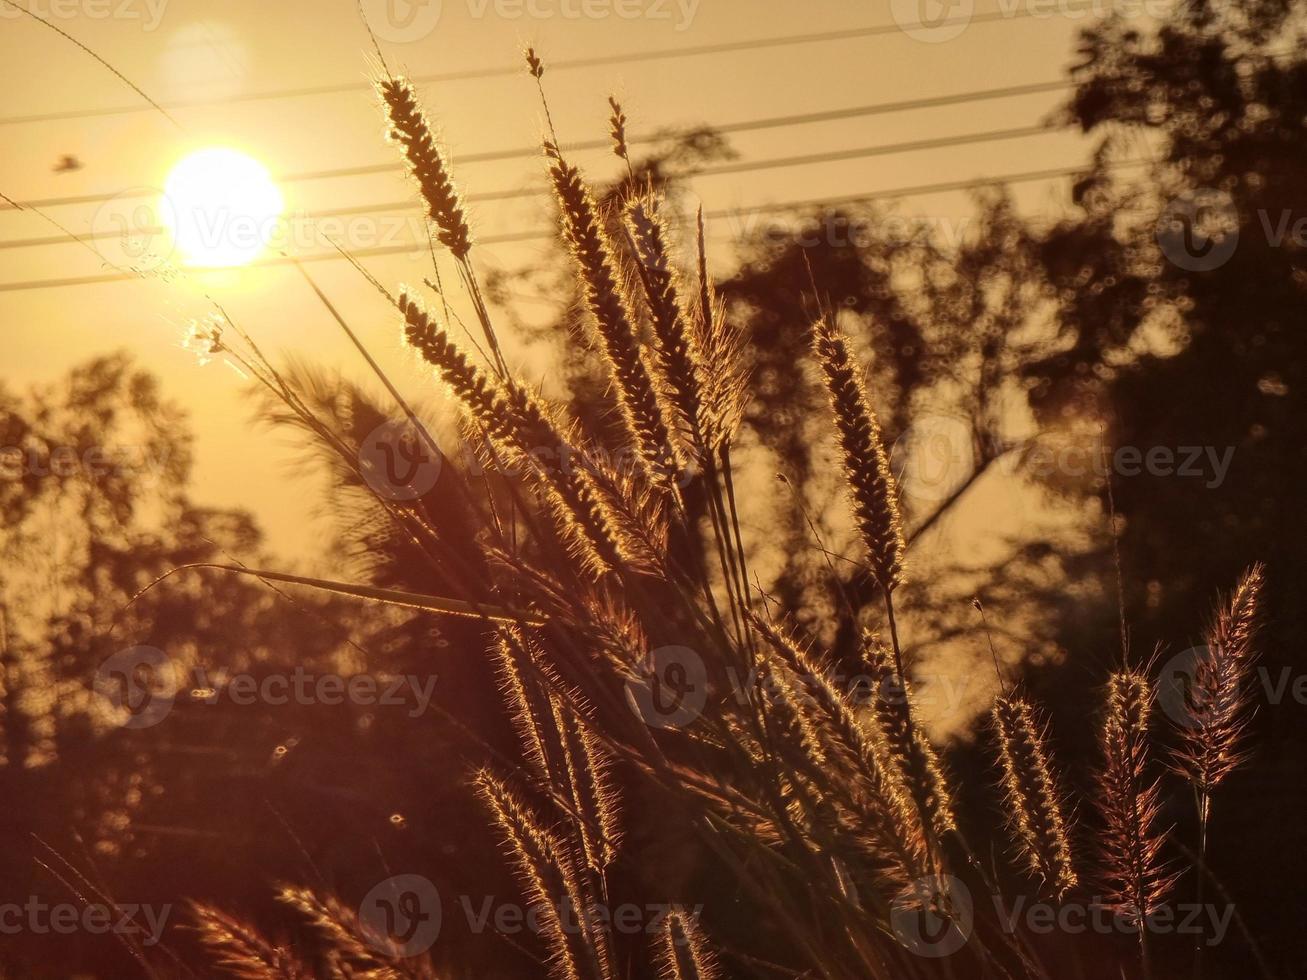 Rim light of Mission grass flower or Feather Pennisetum grass at sunset photo